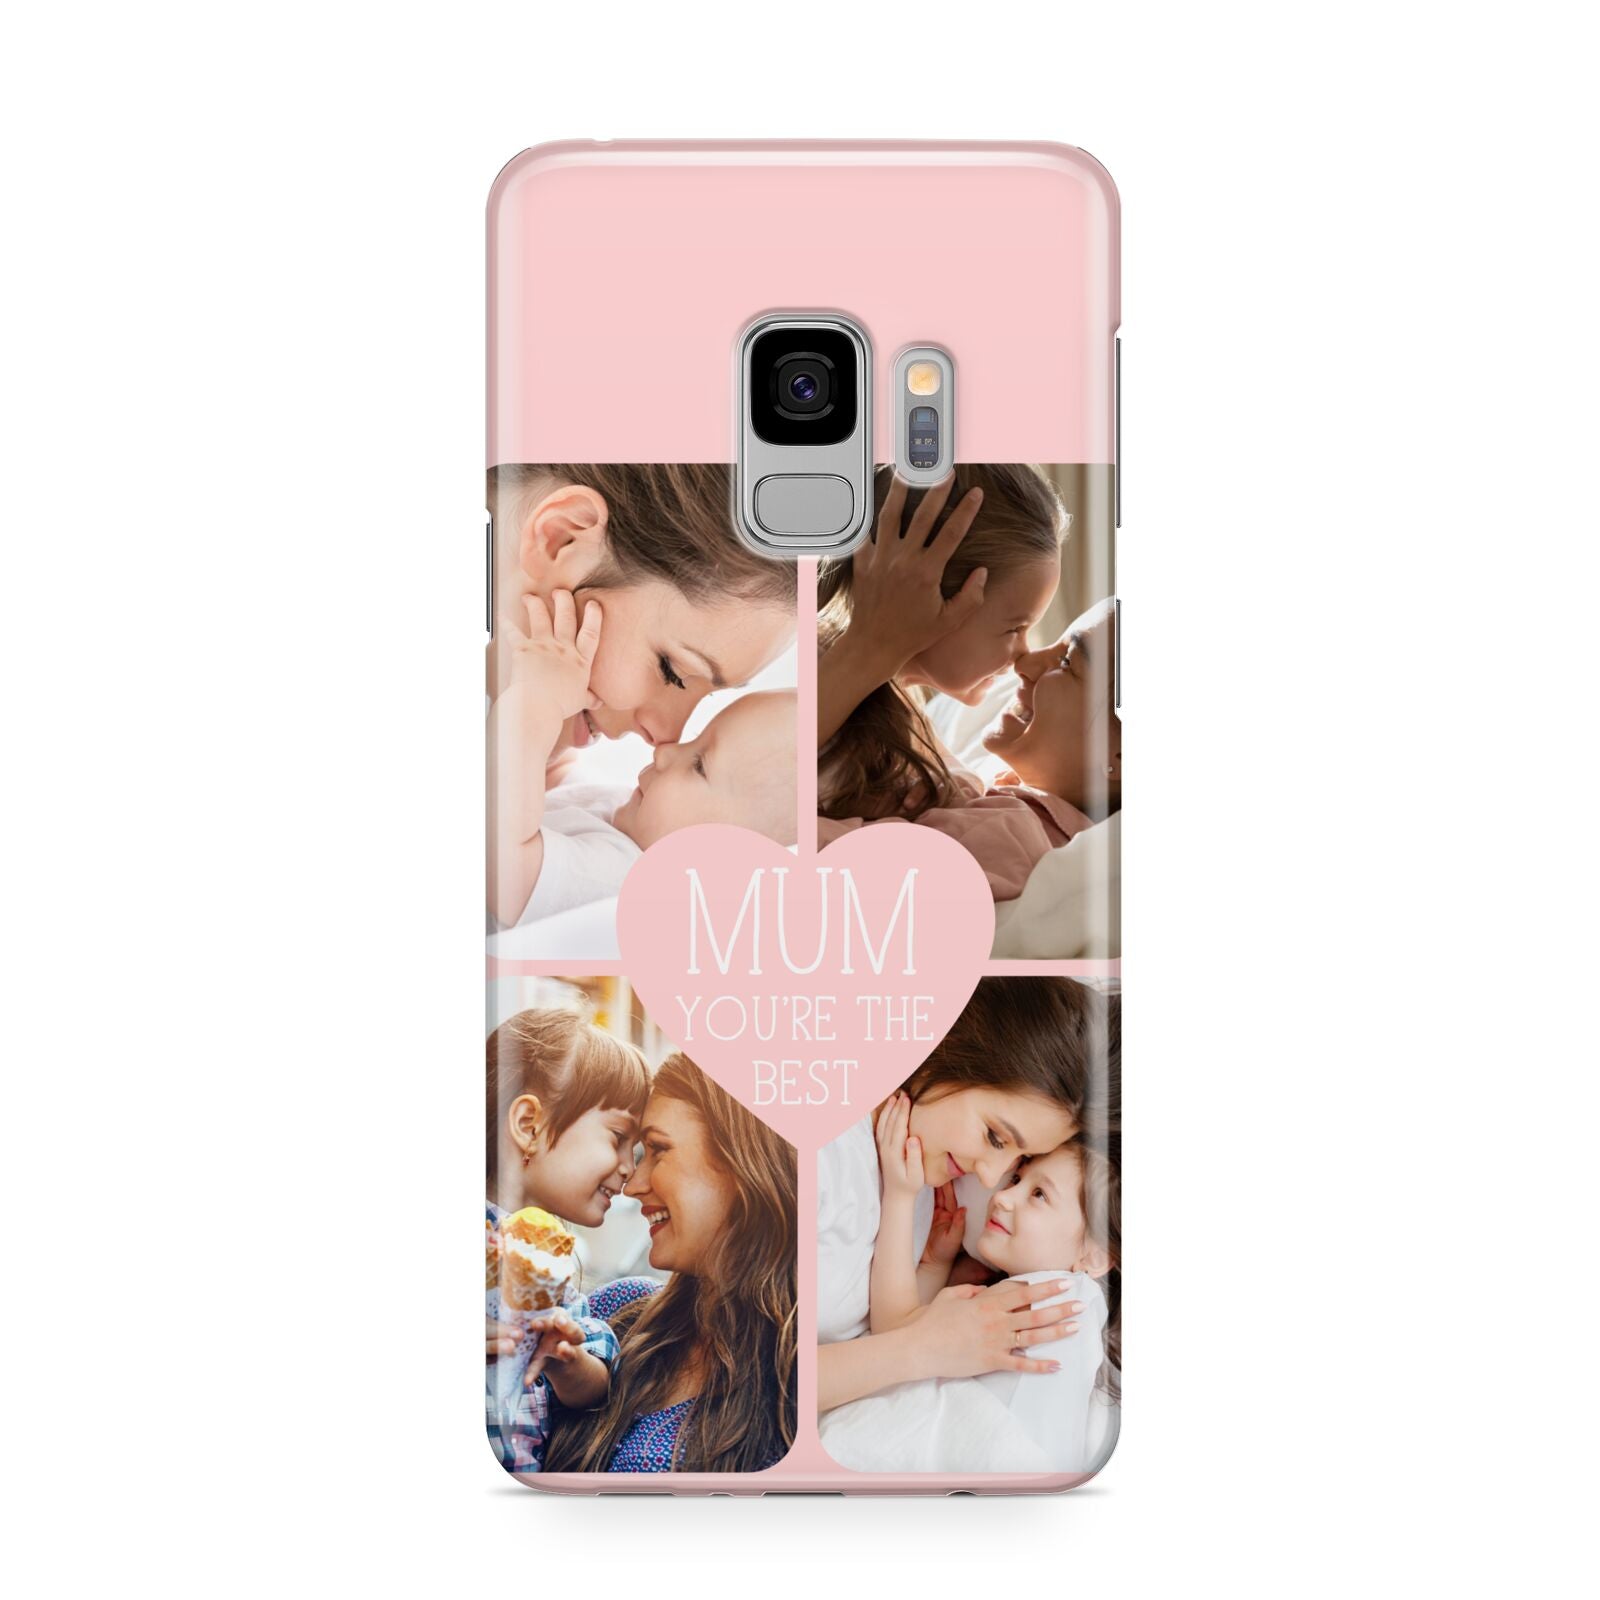 Mothers Day Four Photo Upload Samsung Galaxy S9 Case